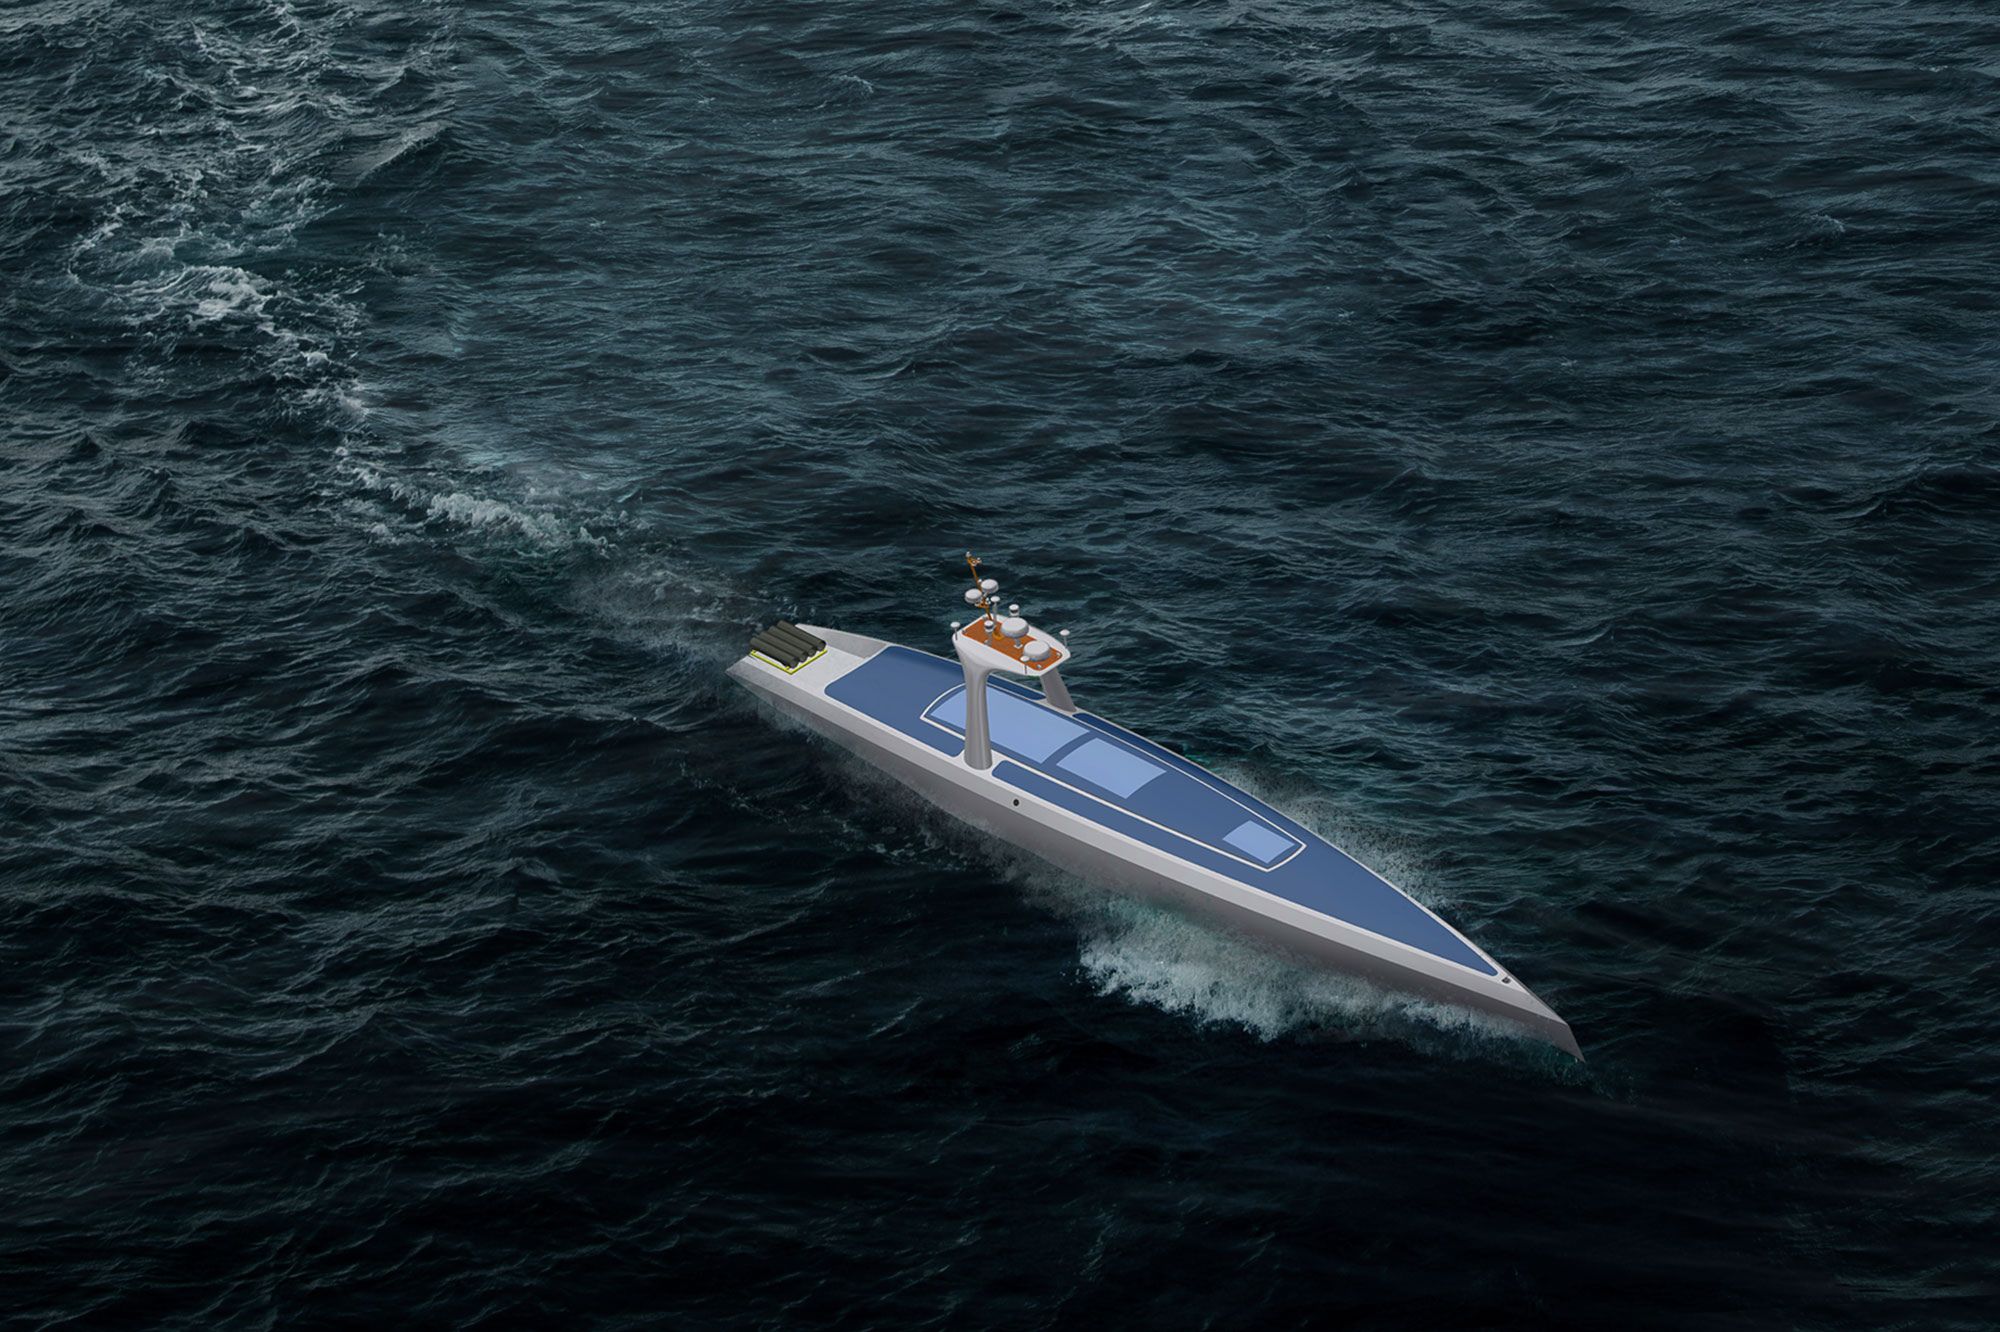 An artist's impression of the Oceanus at sea